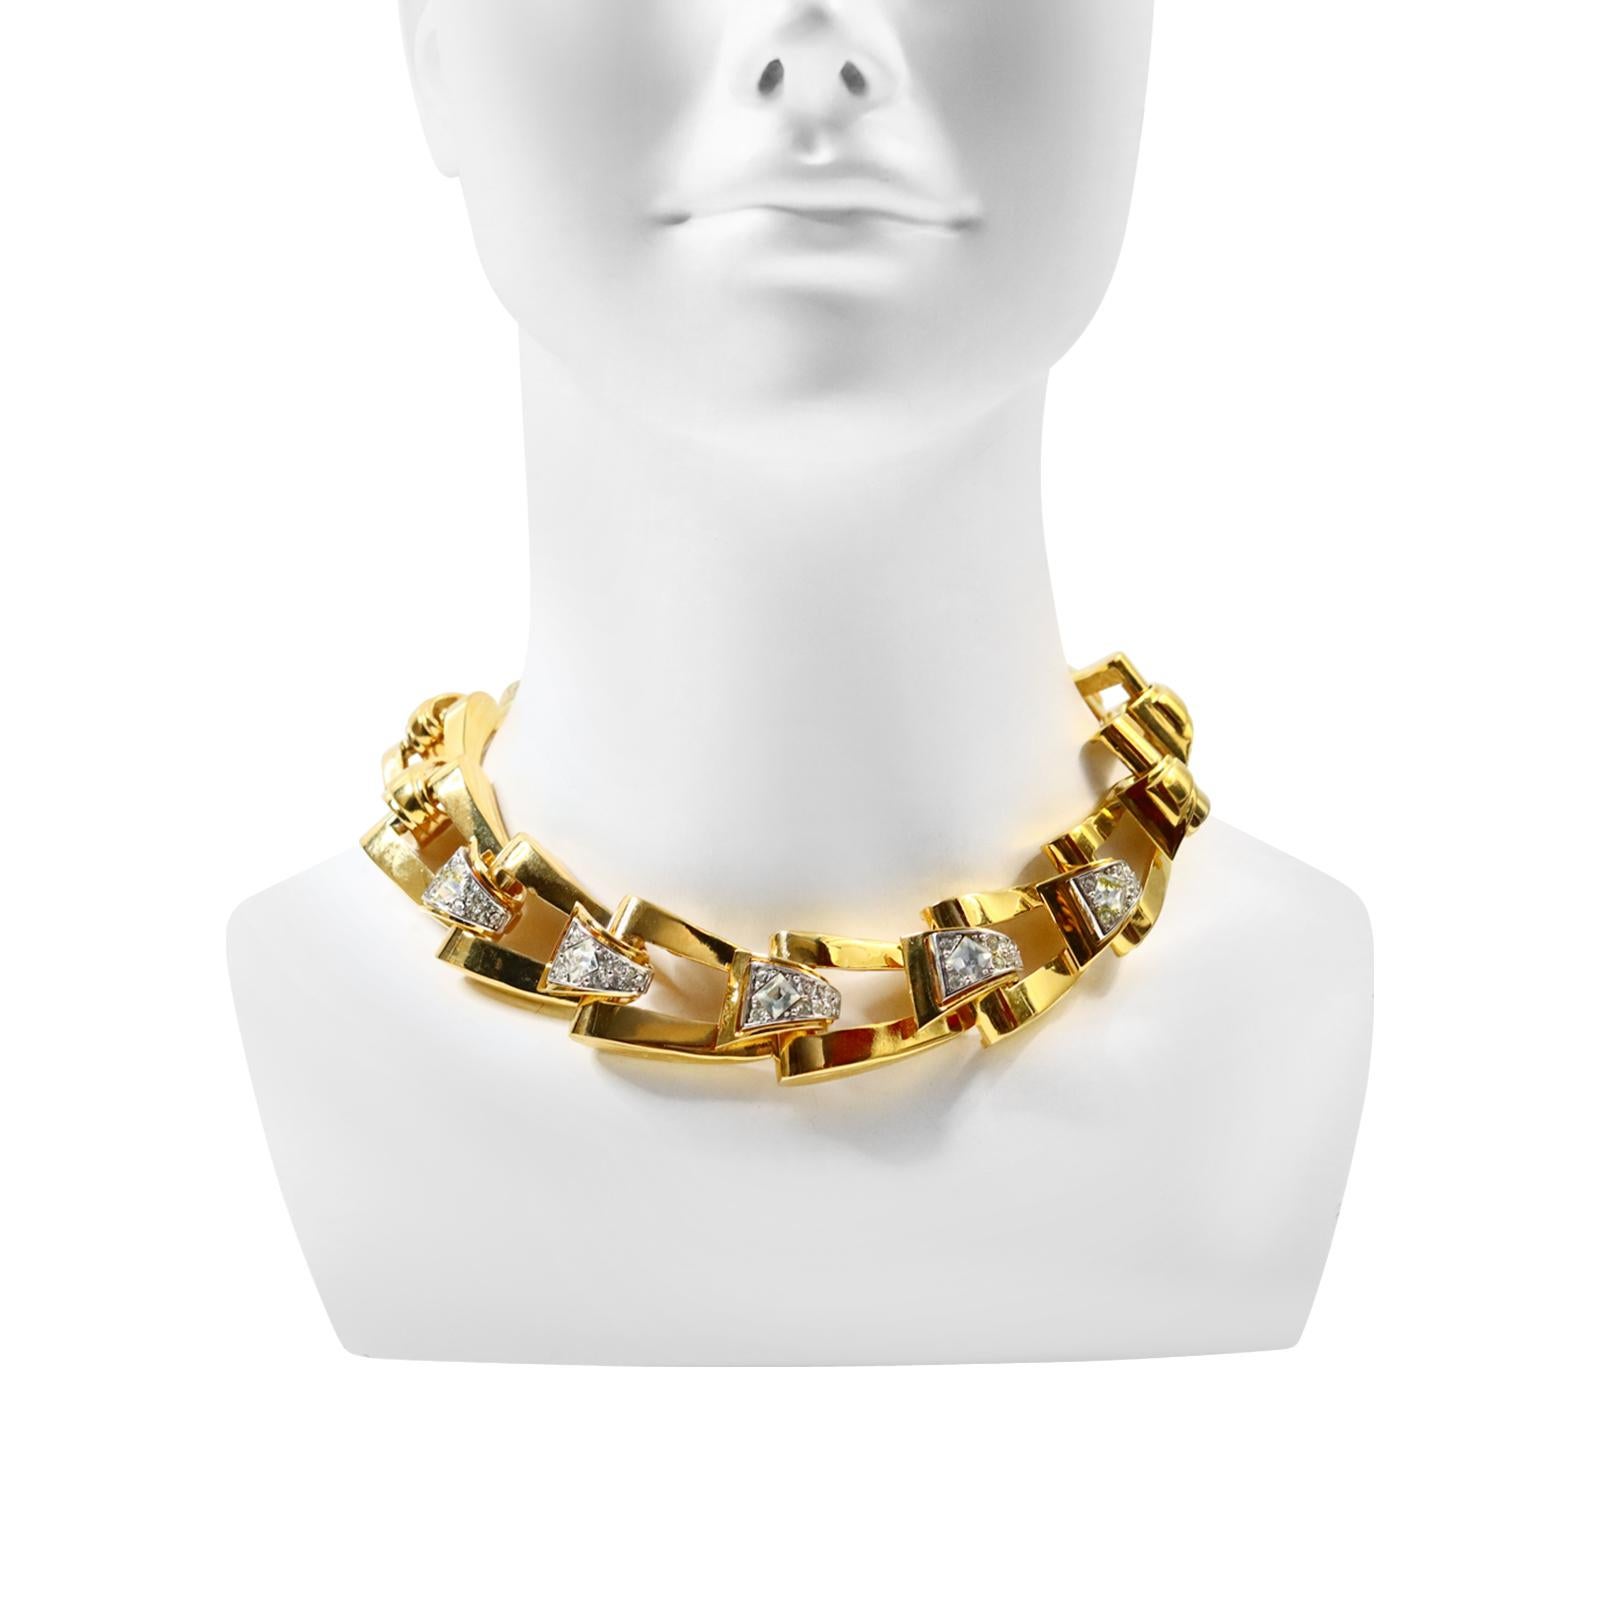 Vintage Givenchy Diamante and Gold Tone Link Necklace. A majority of the links have a piece of gold with diamante. It is pave with a larger crystal in the middle. A heavy and substantial necklace. There is a bracelet on site to coordinate. This